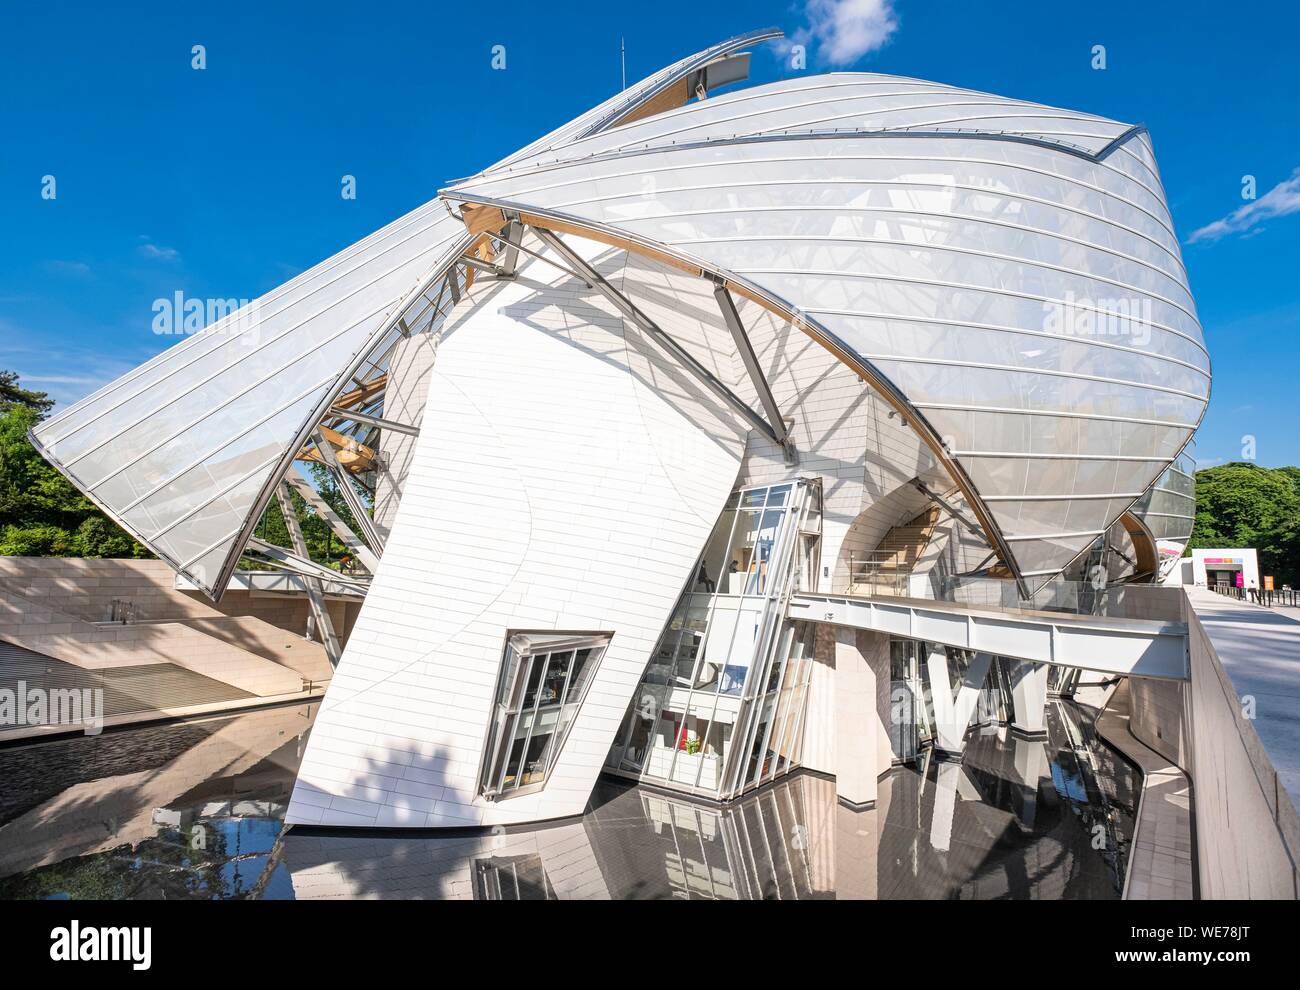 France, Paris, along the GR® Paris 2024, metropolitan long-distance hiking trail created in support of Paris bid for the 2024 Olympic Games, Bois de Boulogne, Louis Vuitton Foundation designed by the architect Frank Gehry Stock Photo